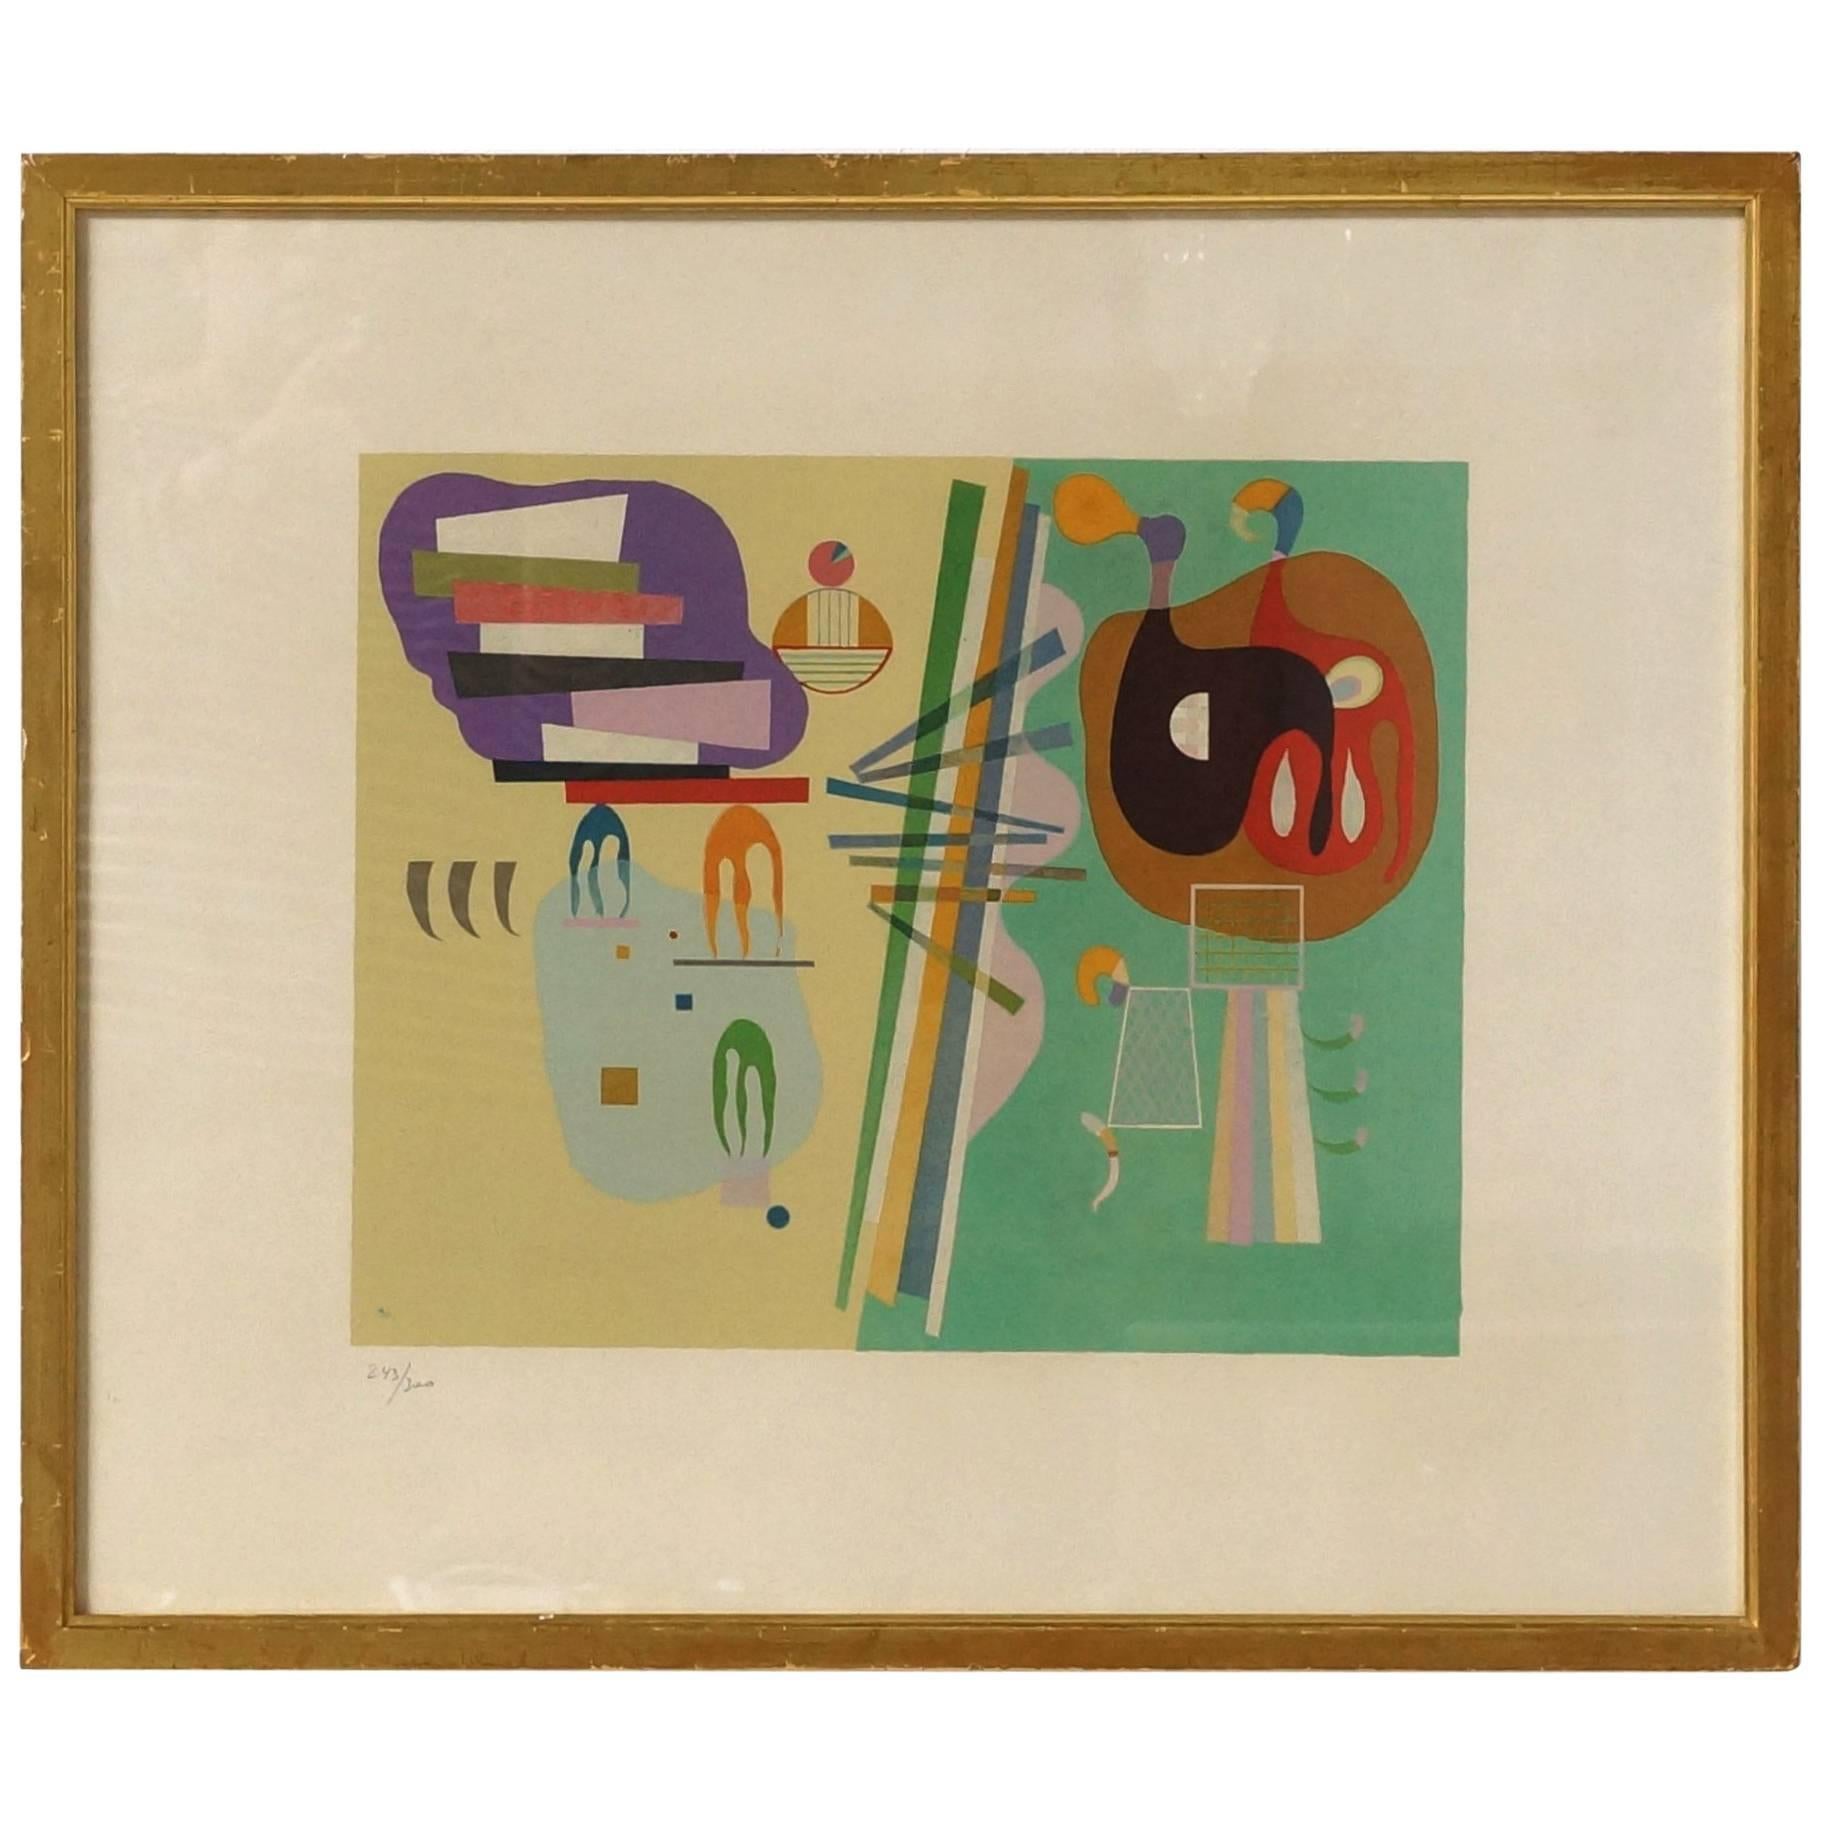 Limited Wassily Kandinsky Untilled Lithograph 1939 Edition 243/300